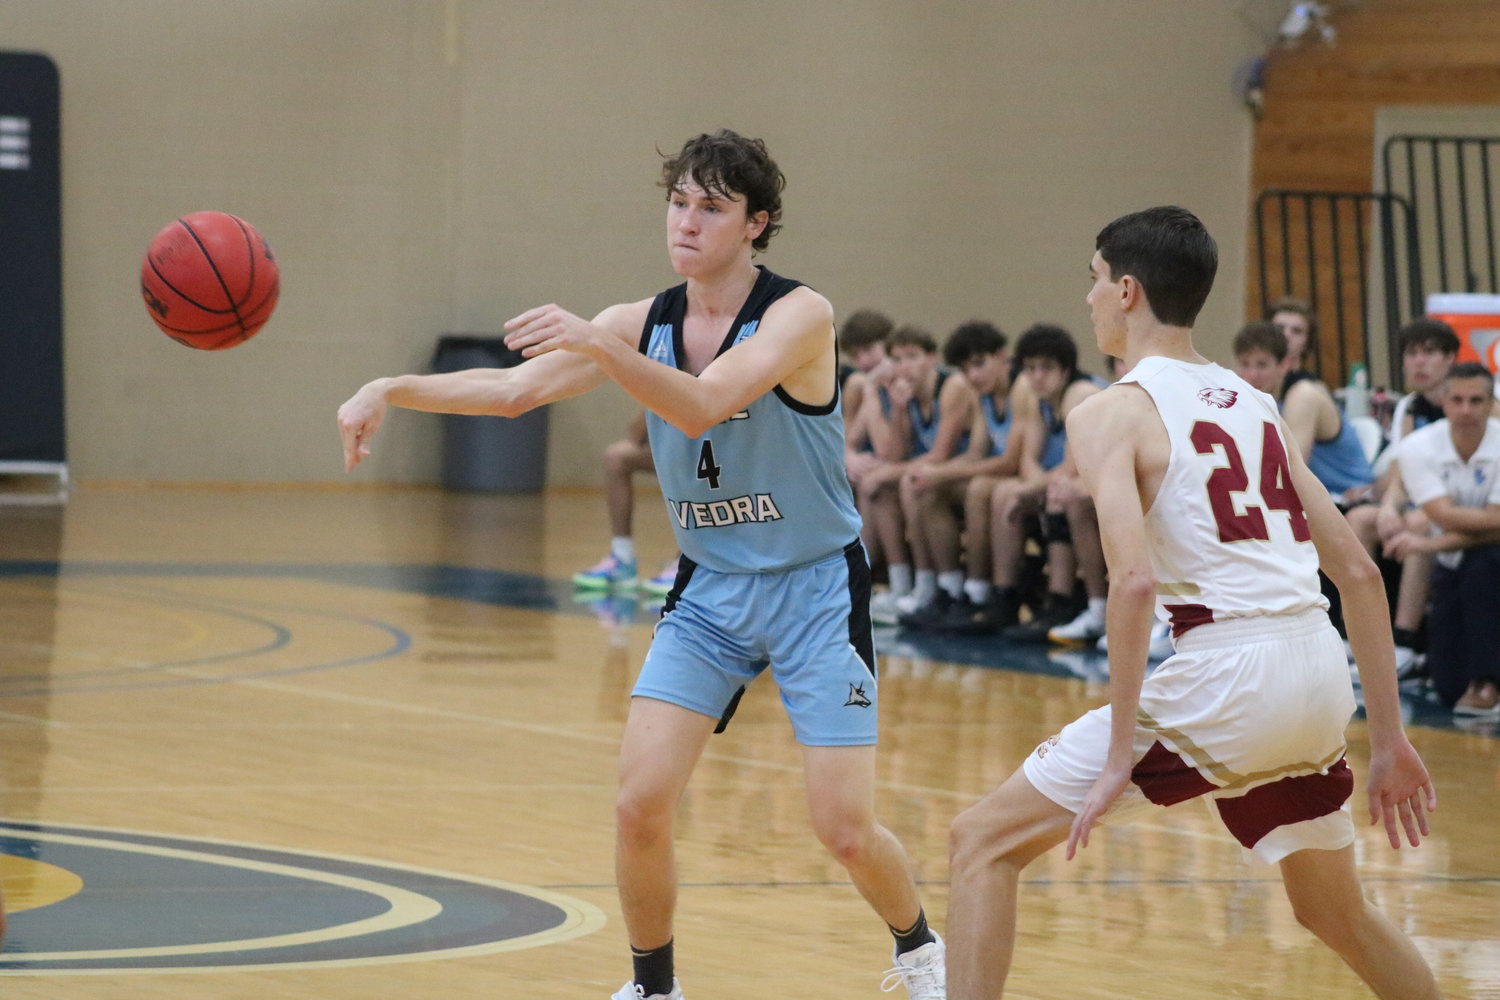 Ponte Vedra High senior J.T. Kelly is averaging 10.3 points per game for the Sharks boys basketball team, and is also among the top 10 academically in his class with a 4.65 weighted GPA.